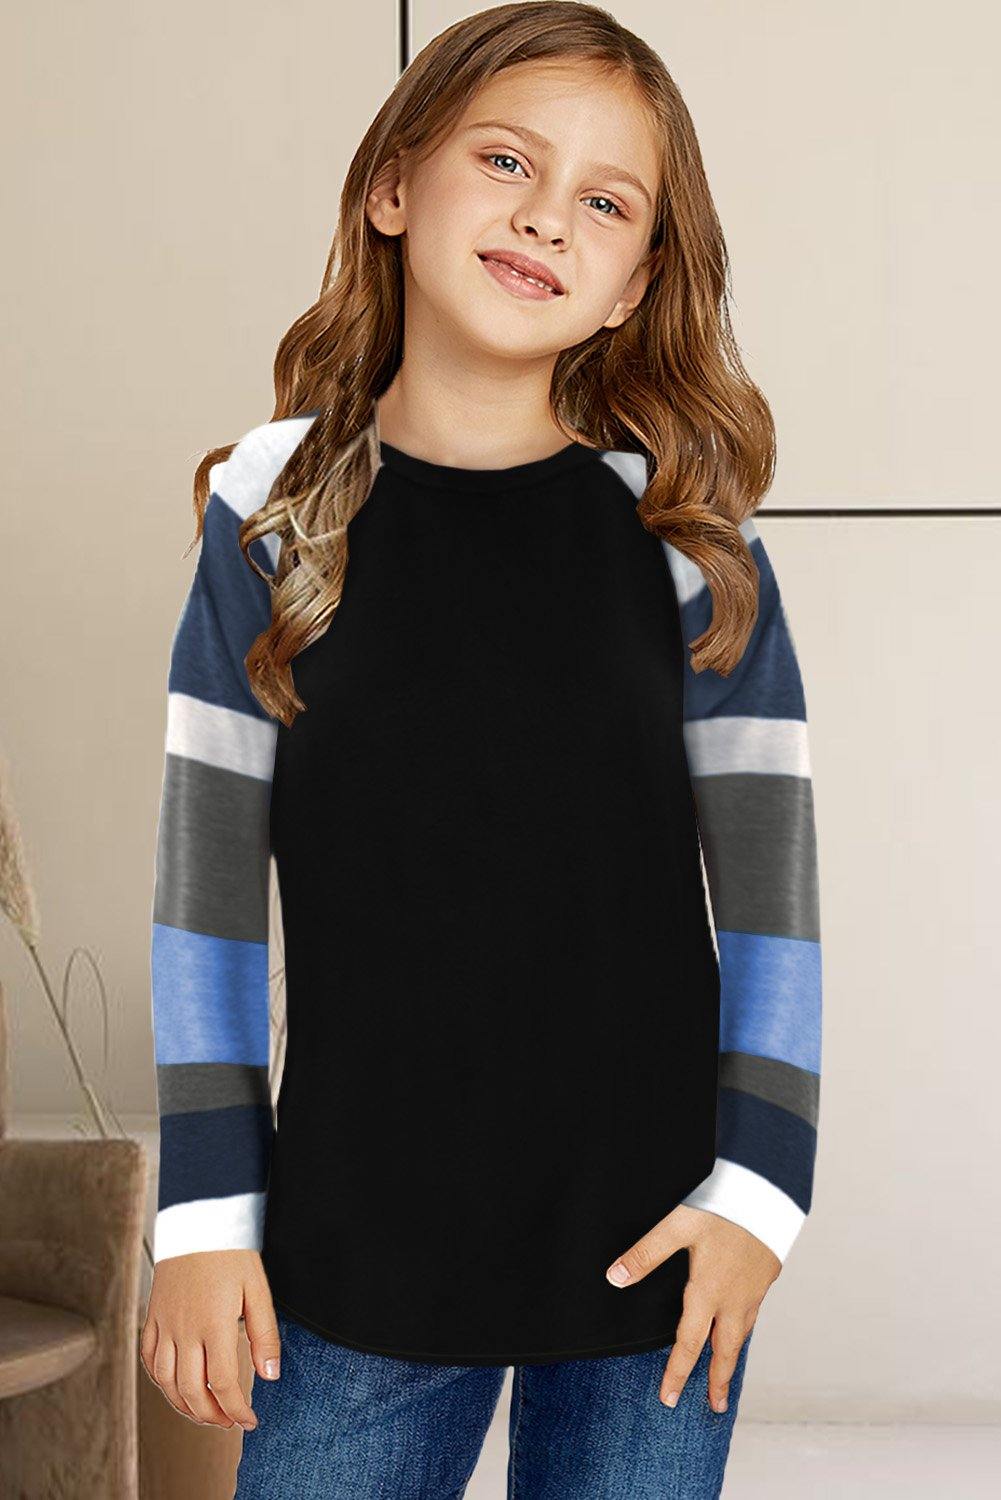 Striped Color Block Girl’s Long Sleeve Top - L & M Kee, LLC